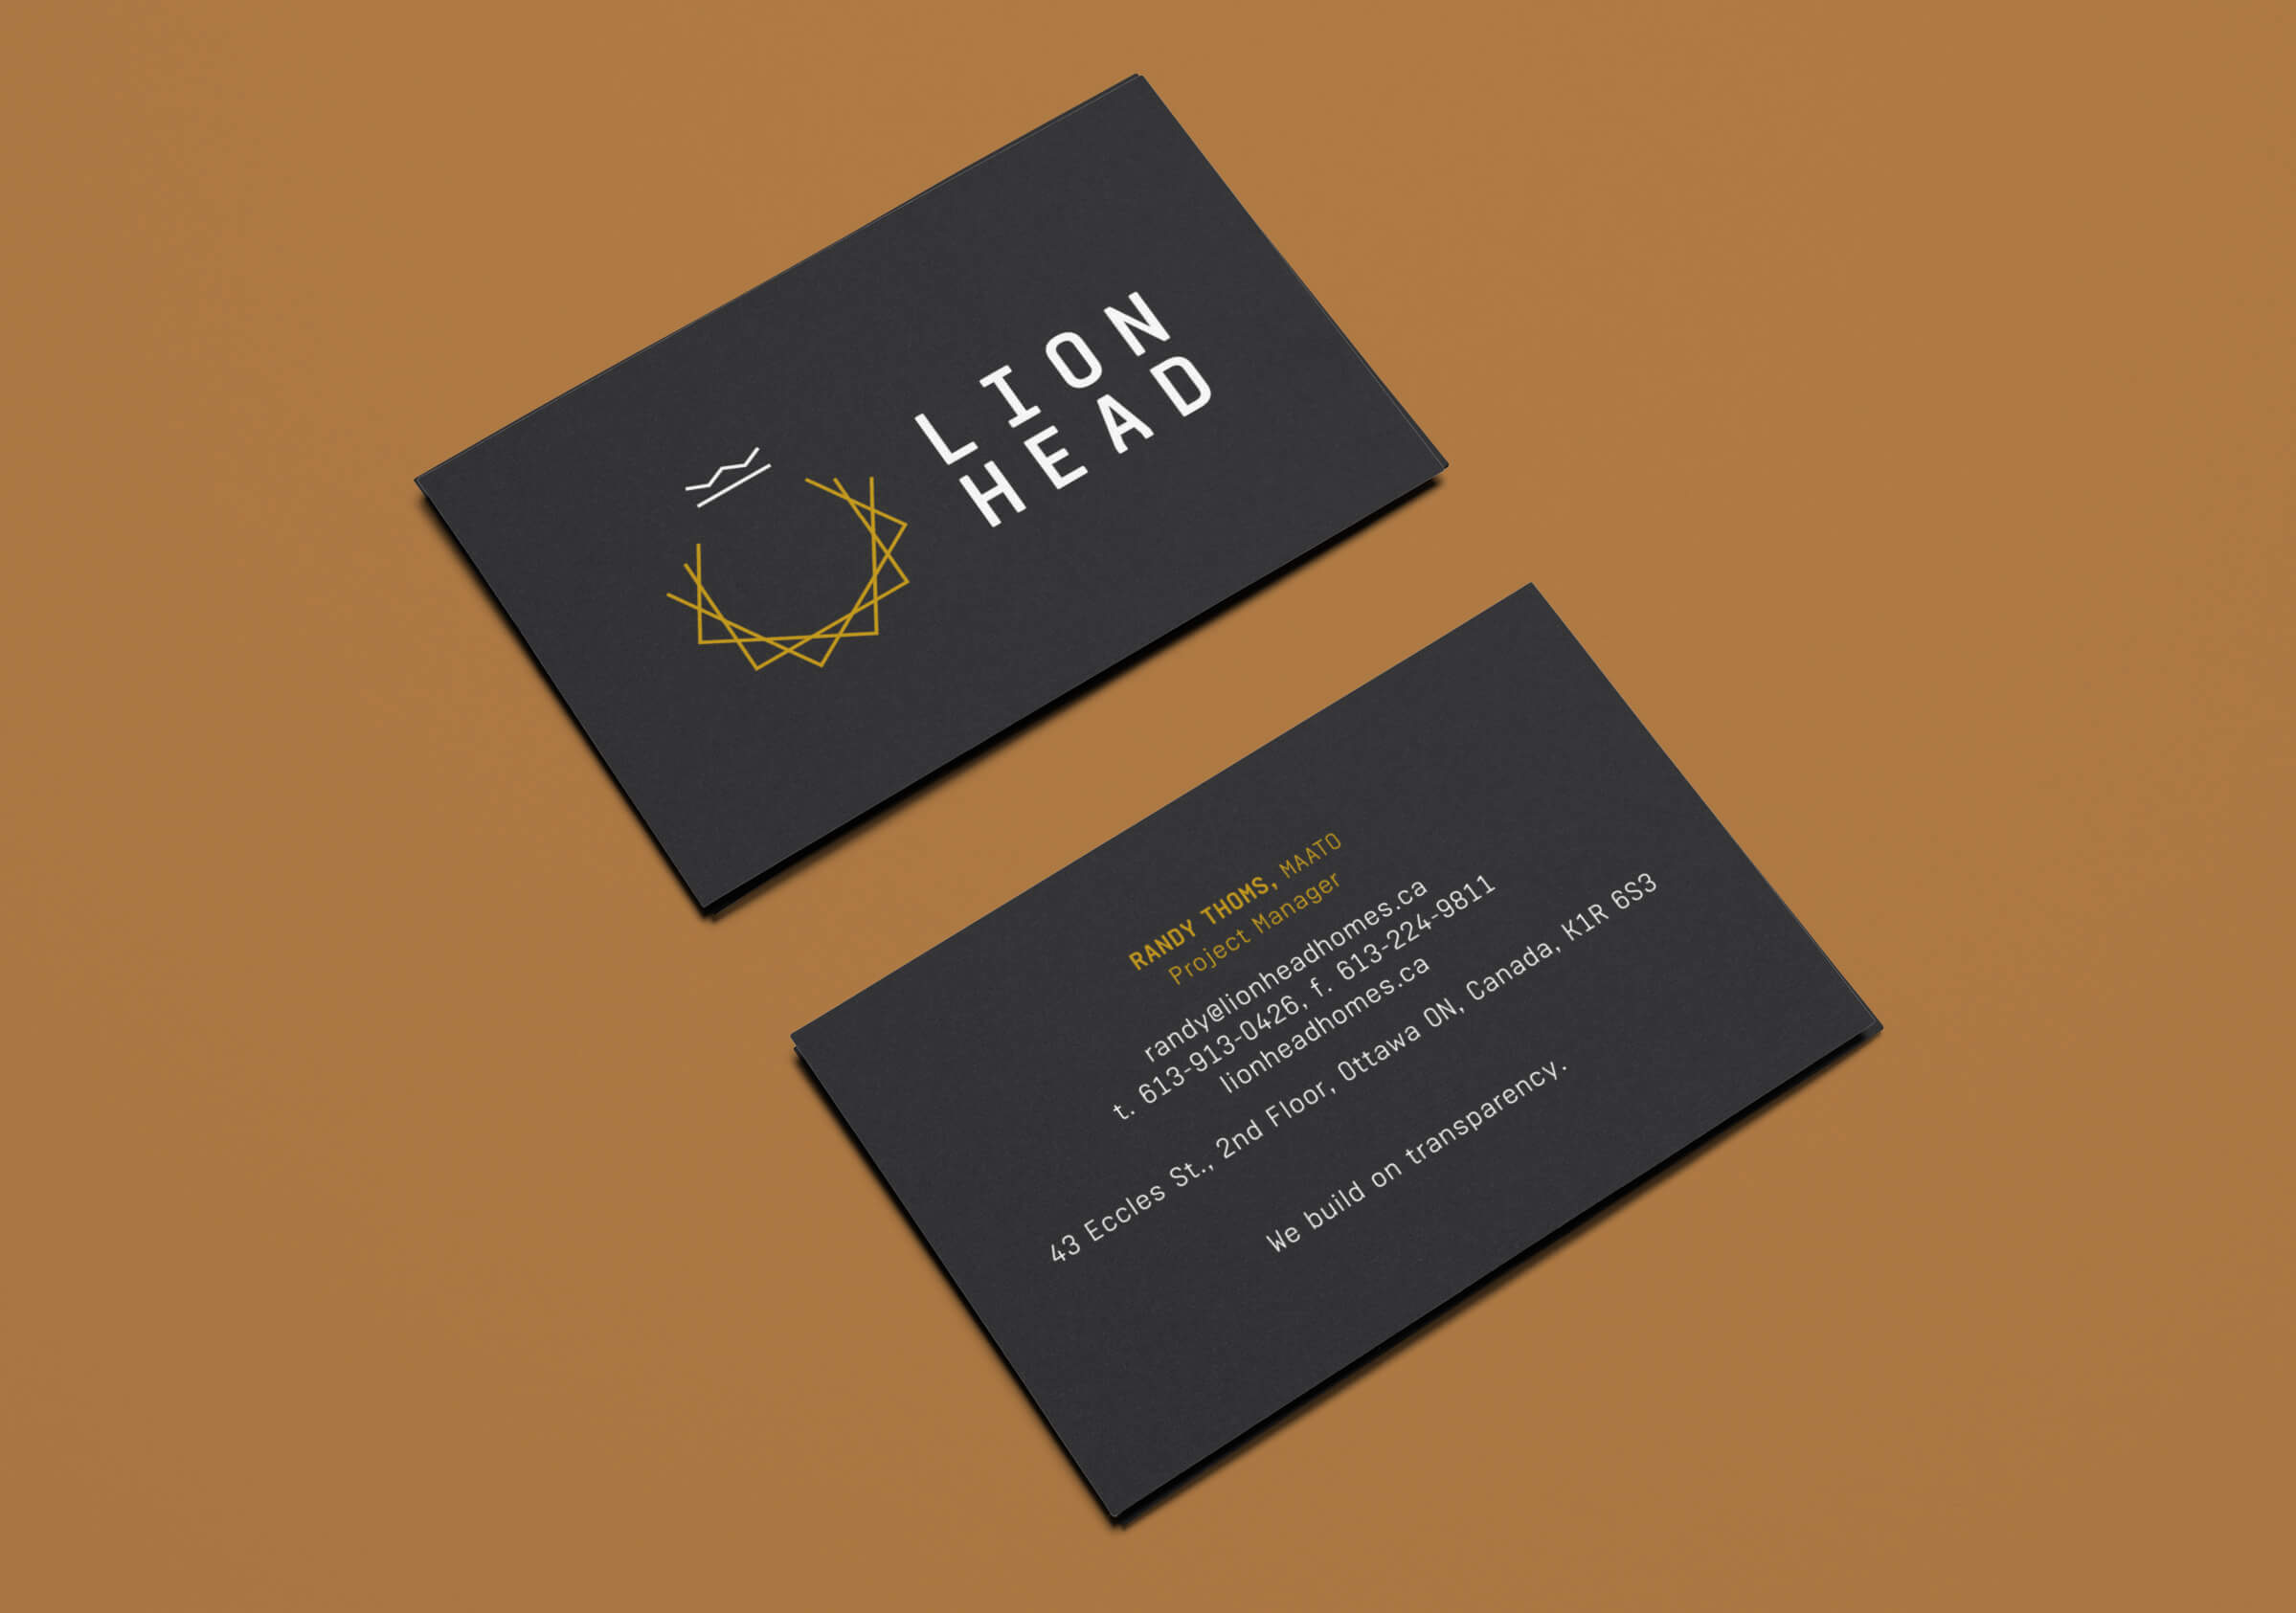 Business Cards for Lionhead, an Ottawa building firm by Graphic Design Studio idApostle